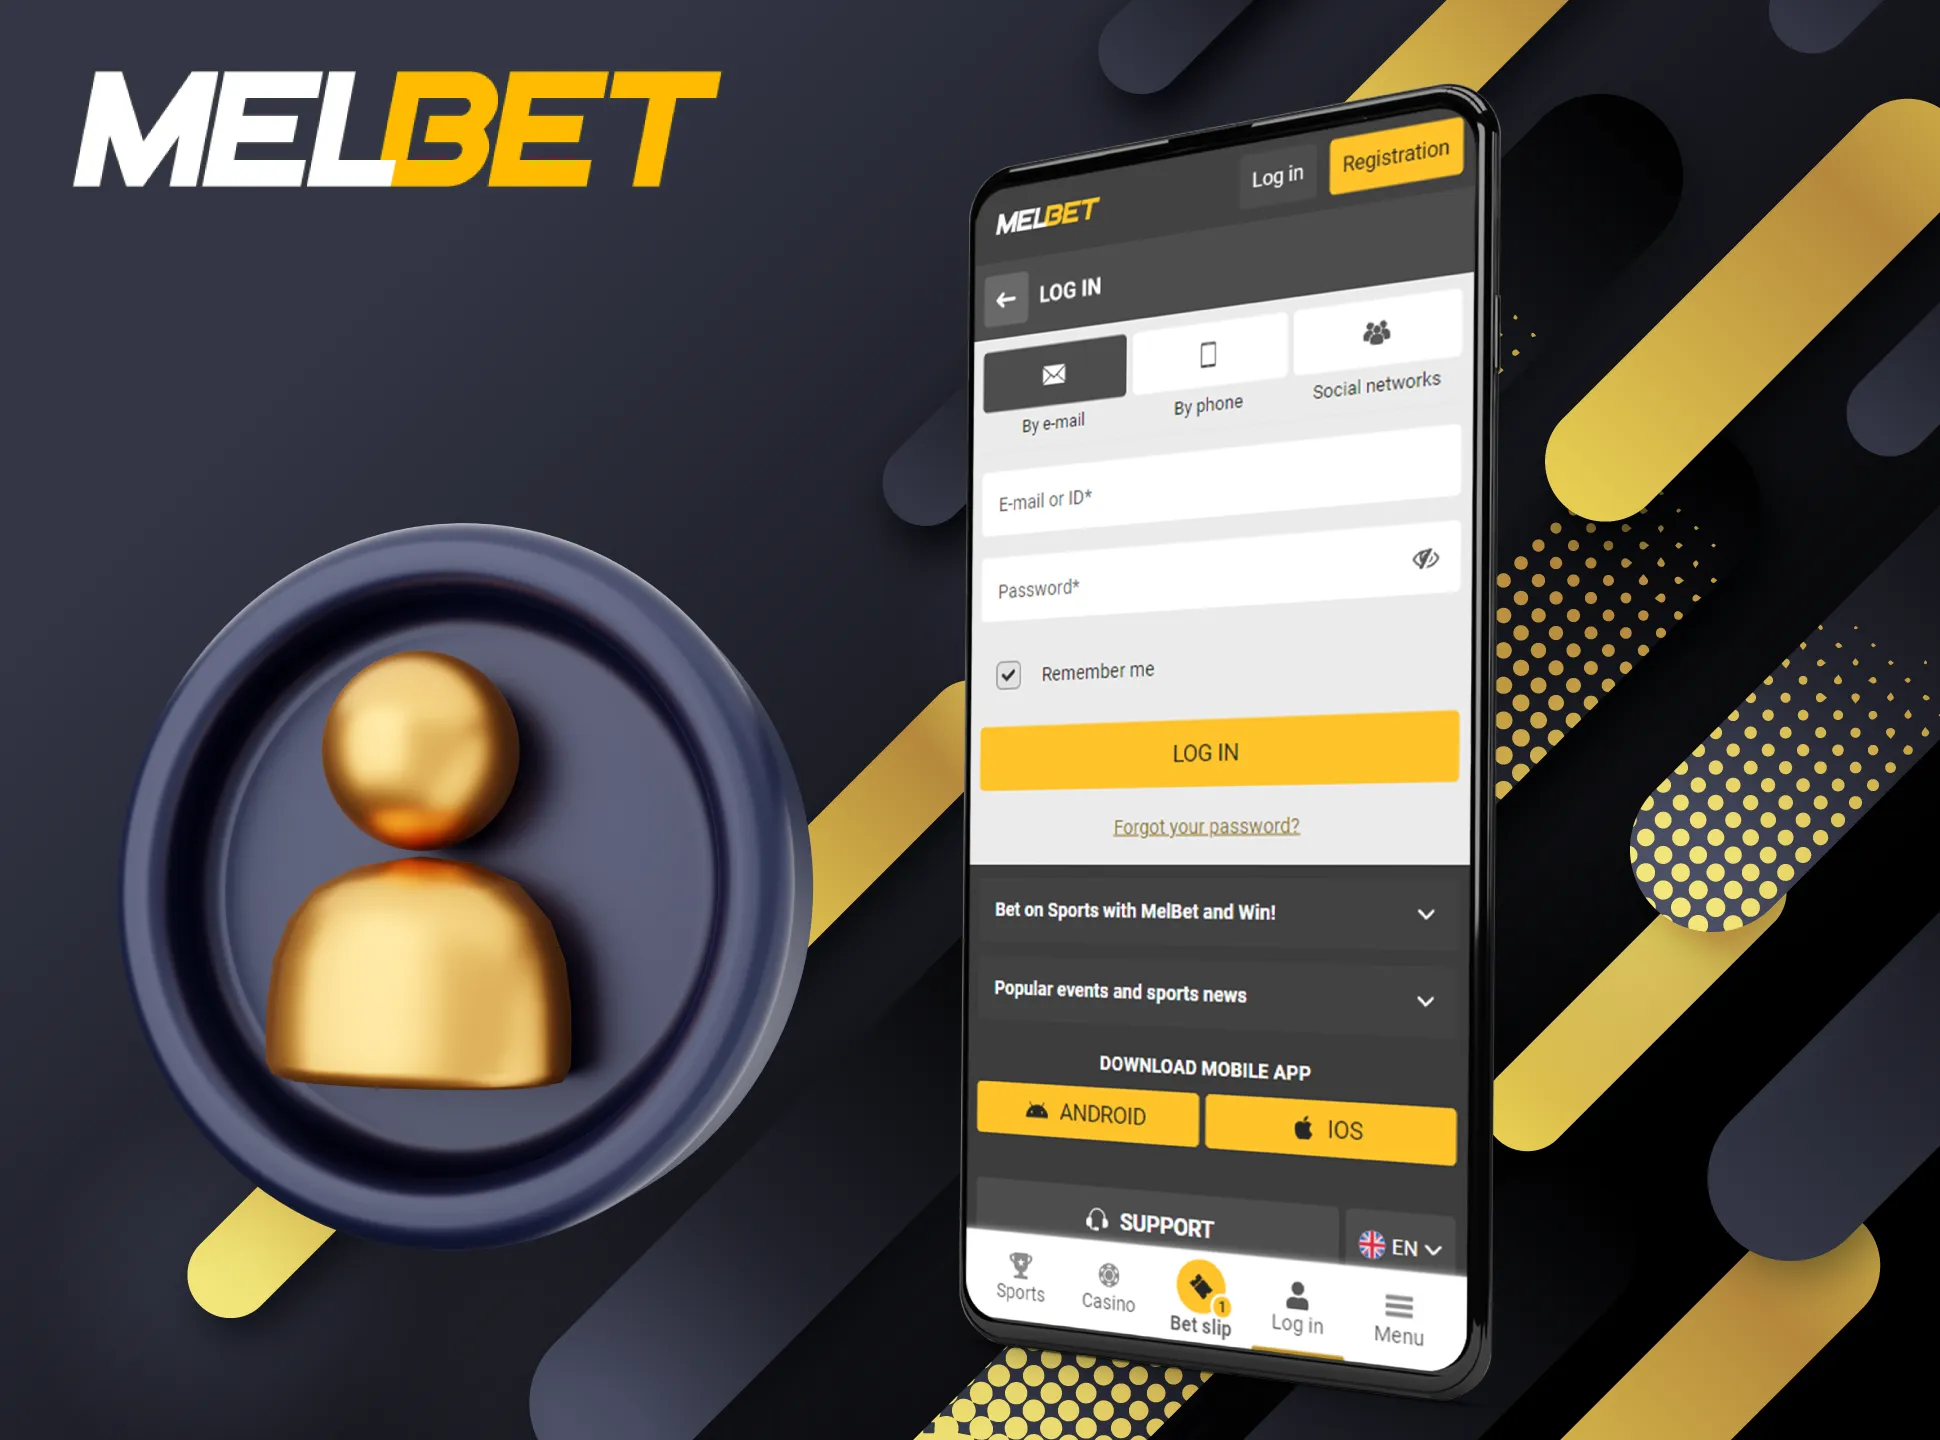 You can also log in to Melbet right in the app.